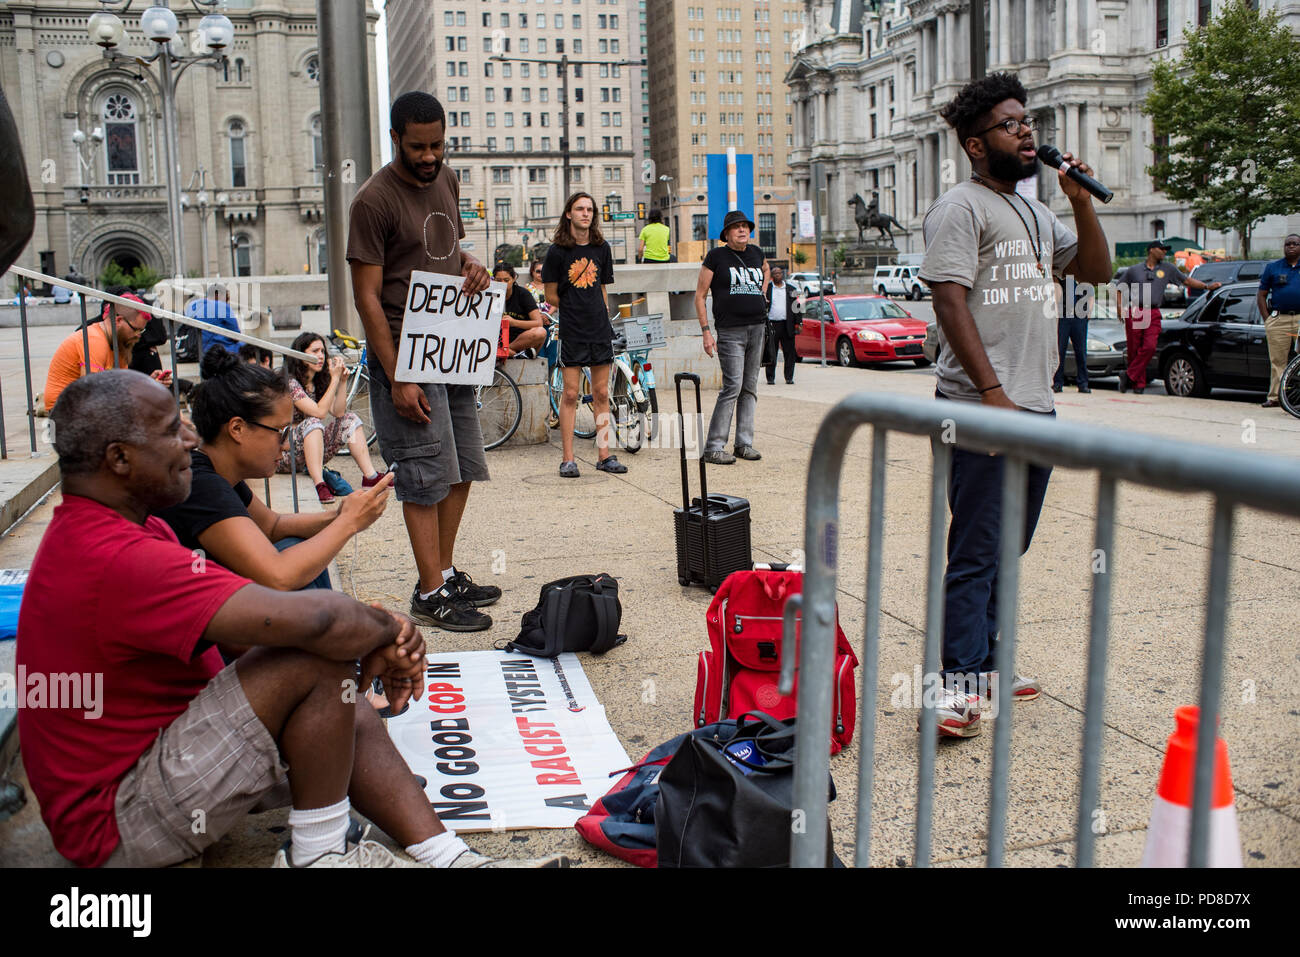 Philadelphia, Pennsylvania / USA. Philly for REAL Justice members hold a weekly protest in front of the statue of former Philadelphia police chief, Frank Rizzo. The organization highlighted the former police chief's record of brutality towards the Black community and is calling for the statue to be removed. August 07 2018. Credit: Christopher Evens/Alamy Live News Stock Photo